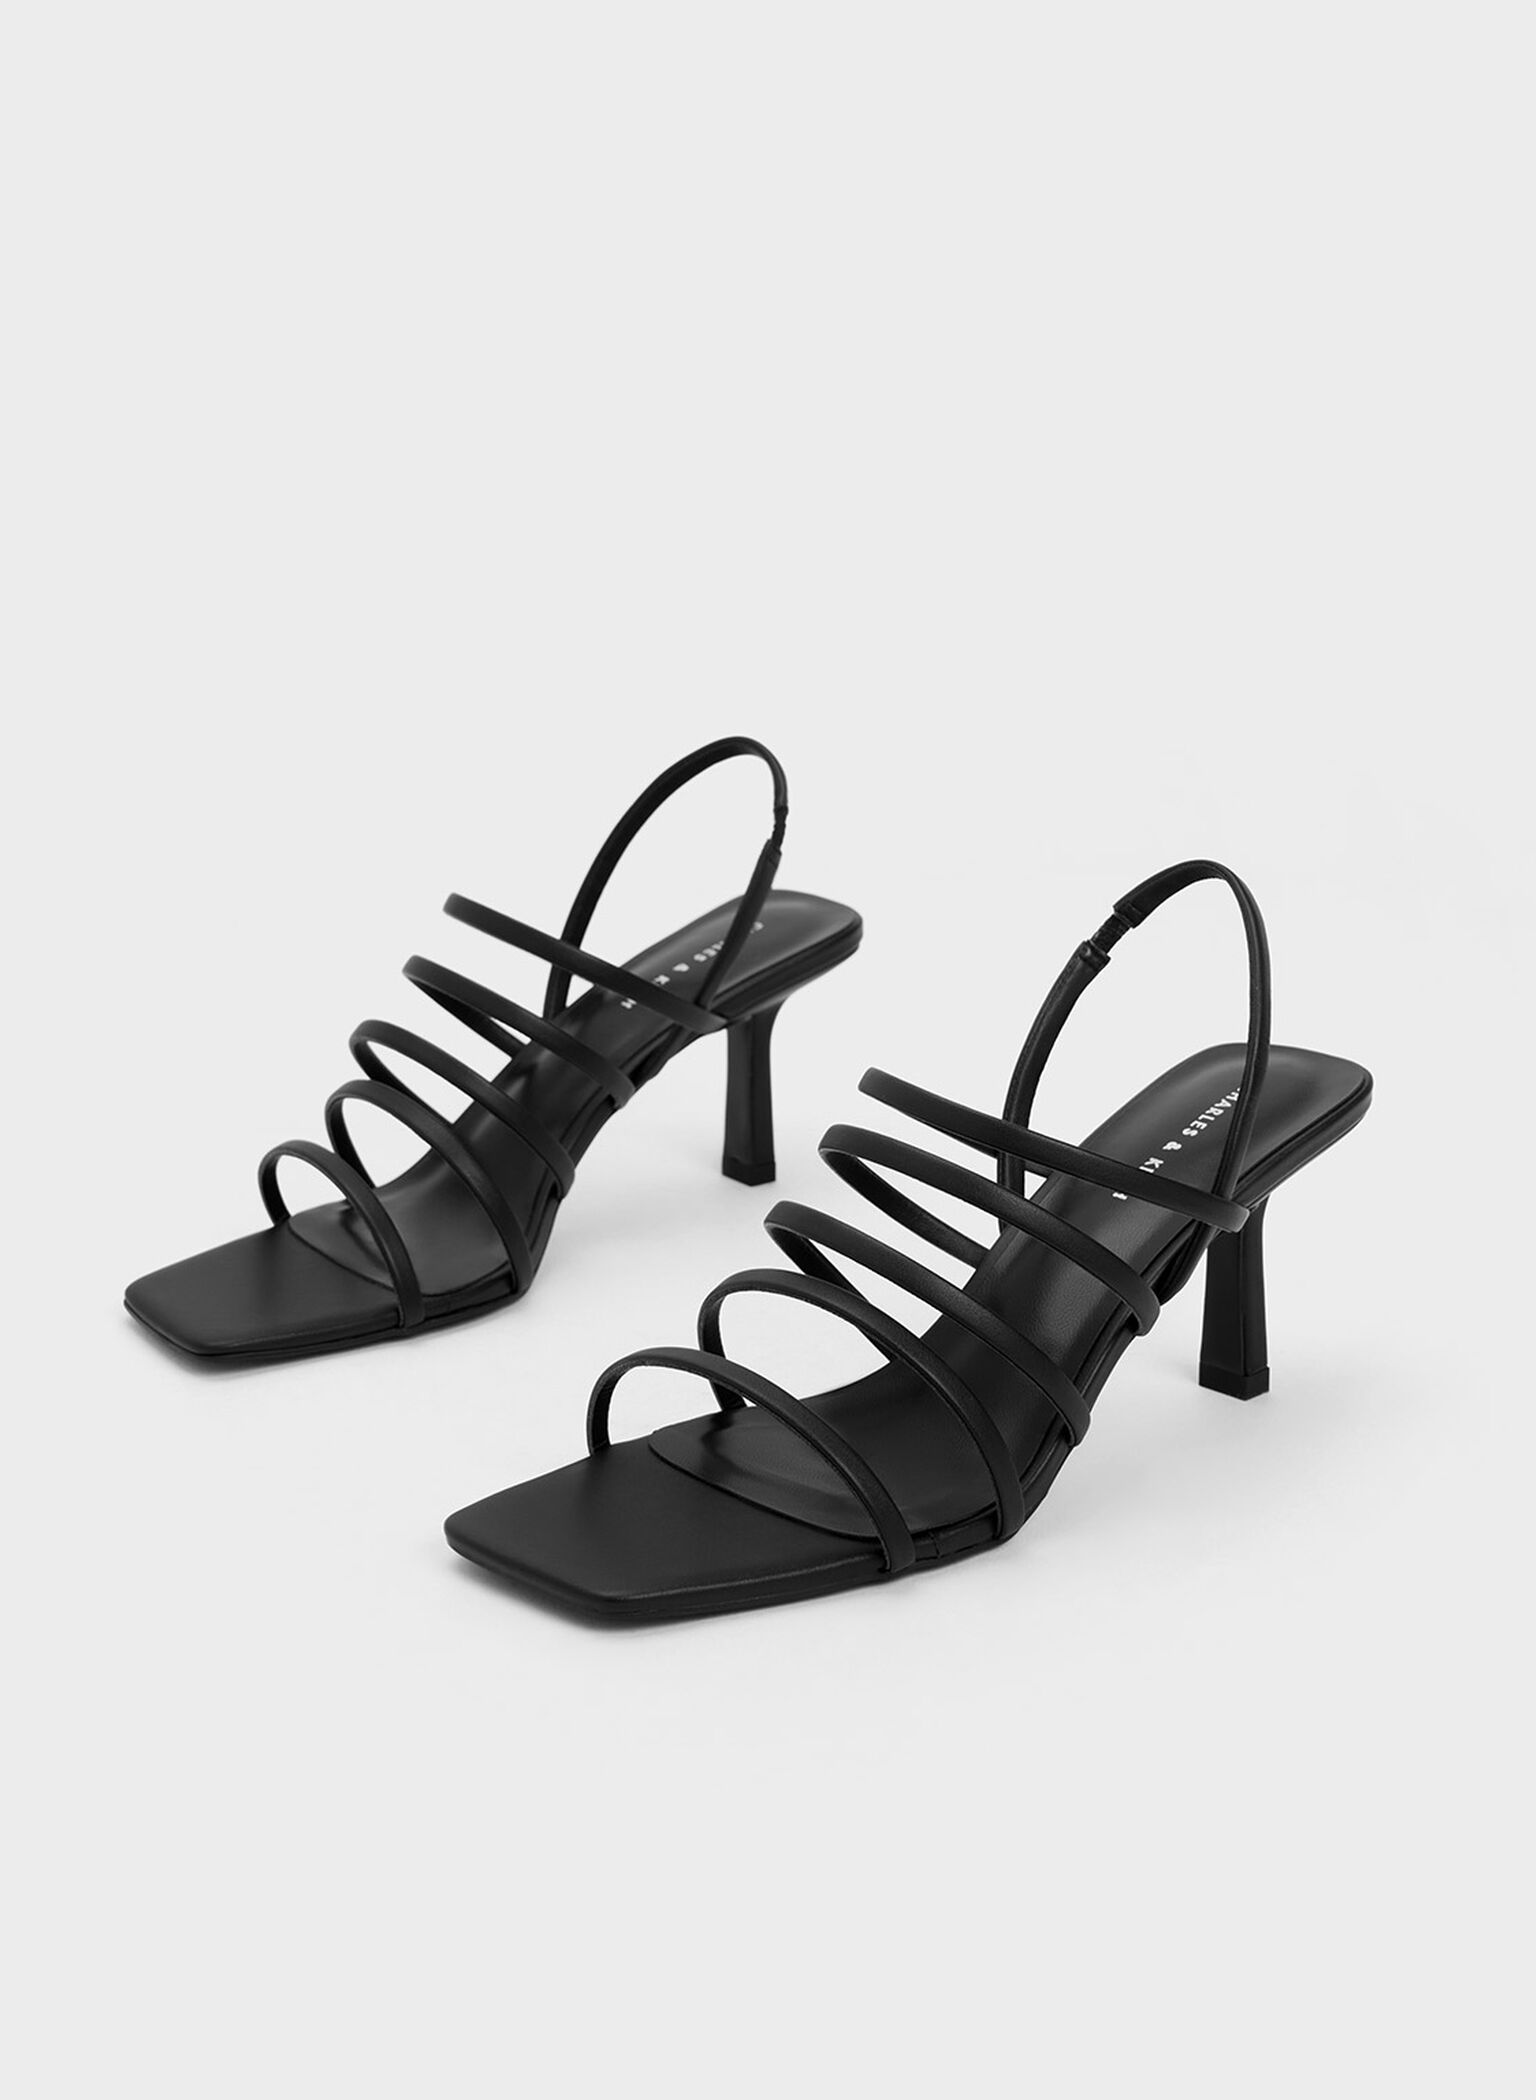 Black Strappy Blade Heel Sandals - CHARLES & KEITH SG